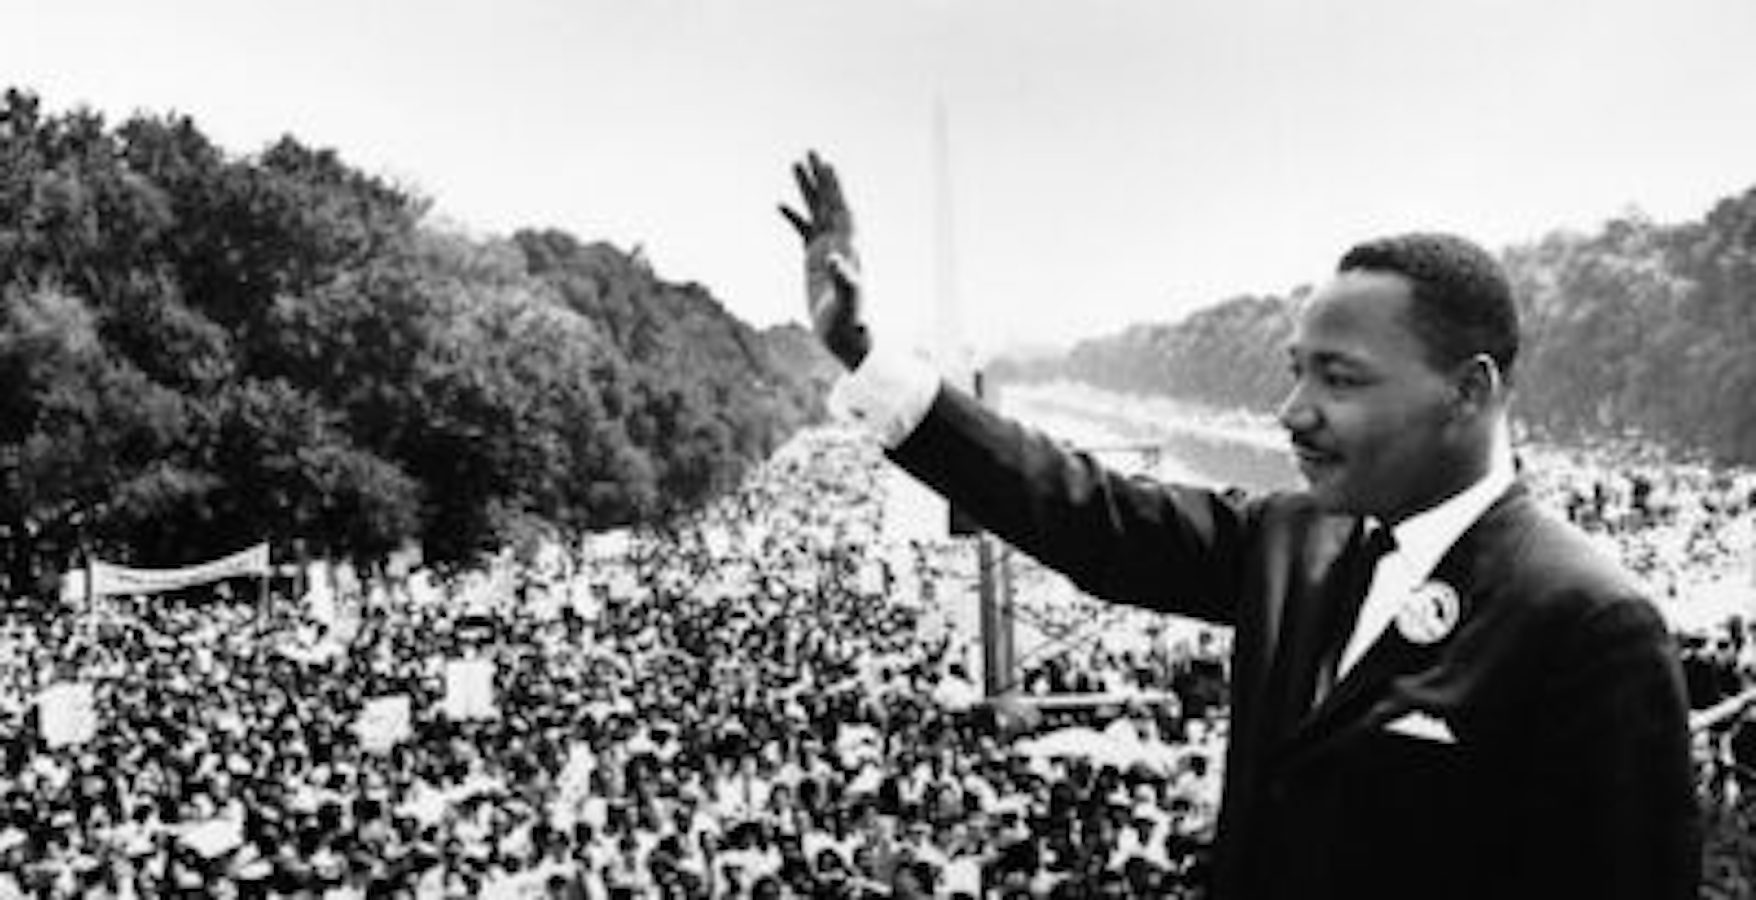 The Rev. Dr. Martin Luther King Jr. at the March on Washington